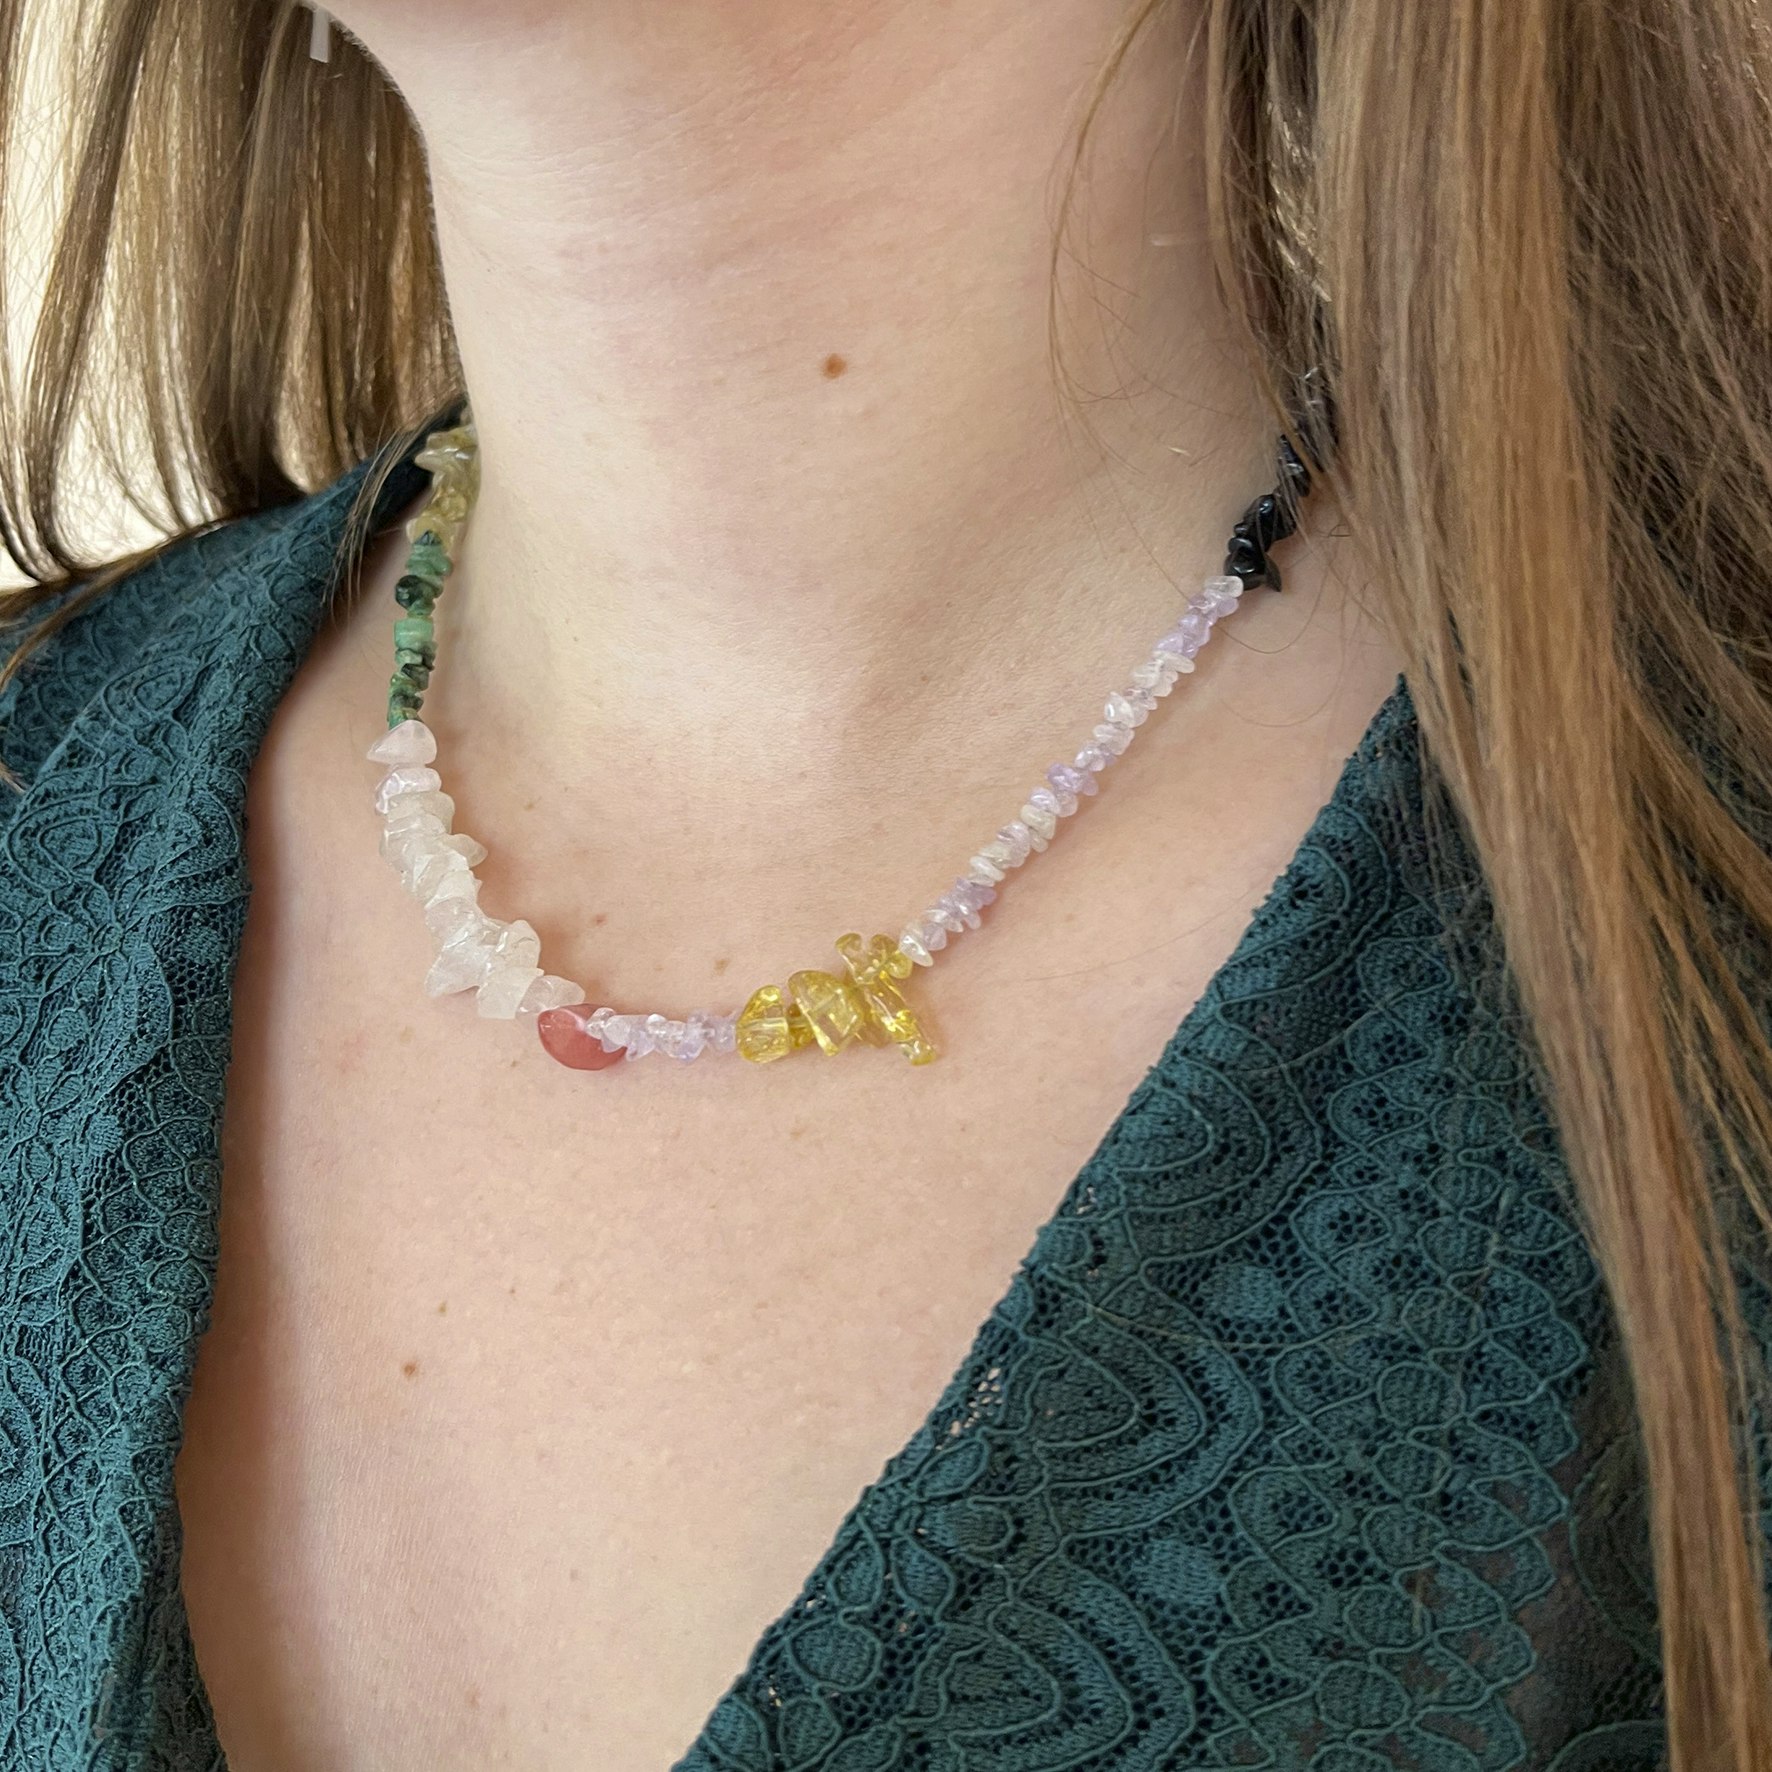 Crispy Coast Necklace - Pacific Colors With Pearls & Gemstones from STINE A Jewelry in Goldplated-Silver Sterling 925